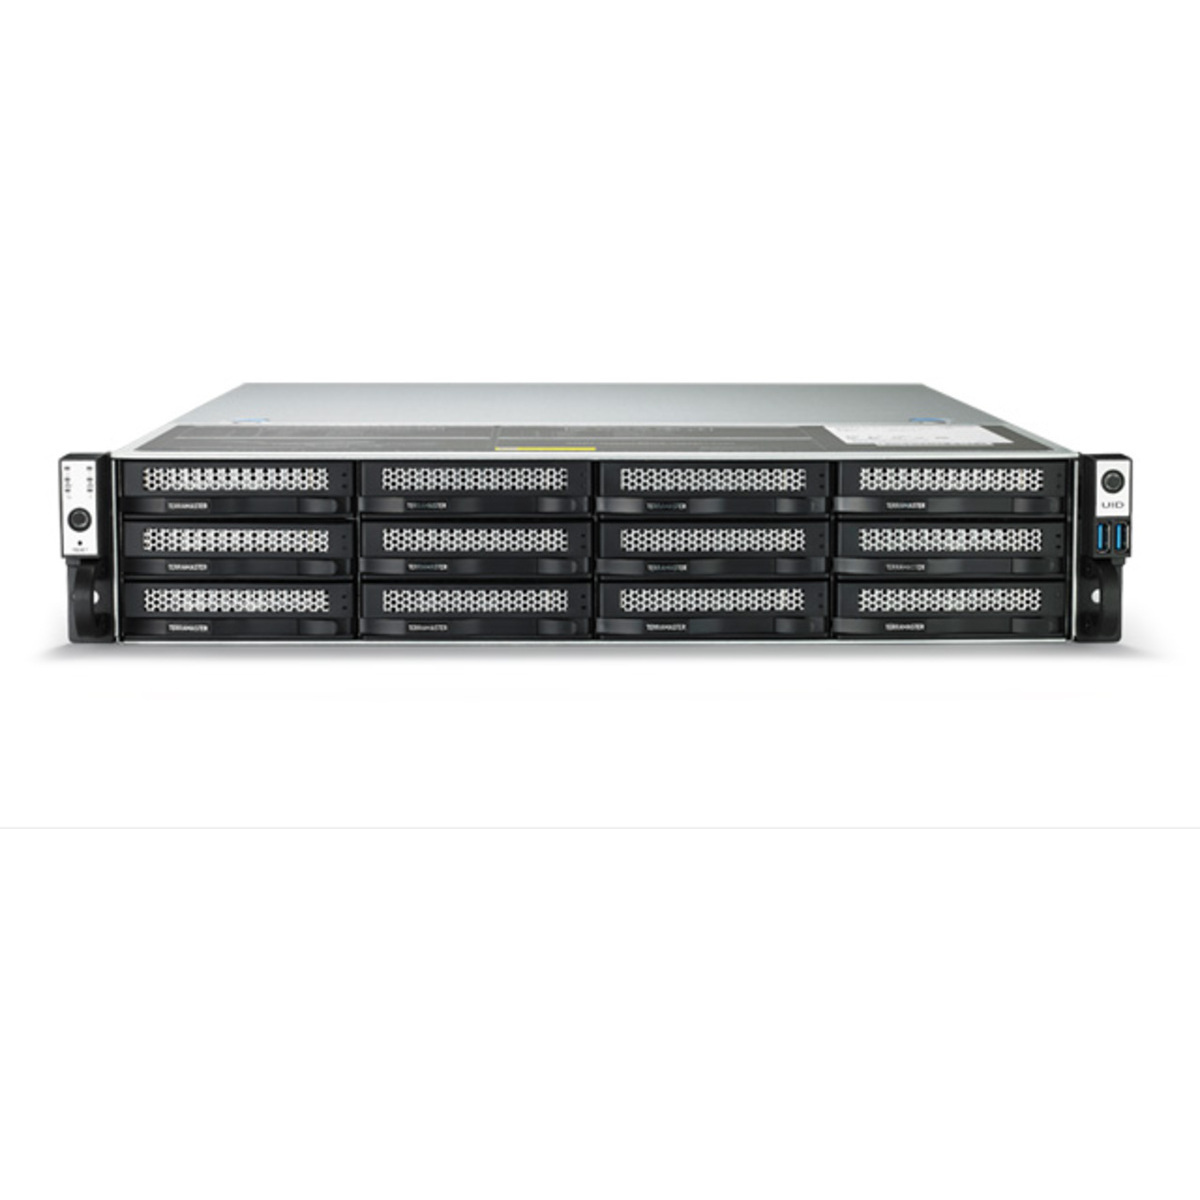 TerraMaster U12-722-2224 22tb 12-Bay RackMount Large Business / Enterprise NAS - Network Attached Storage Device 11x2tb Crucial MX500 CT2000MX500SSD1 2.5 560/510MB/s SATA 6Gb/s SSD CONSUMER Class Drives Installed - Burn-In Tested U12-722-2224